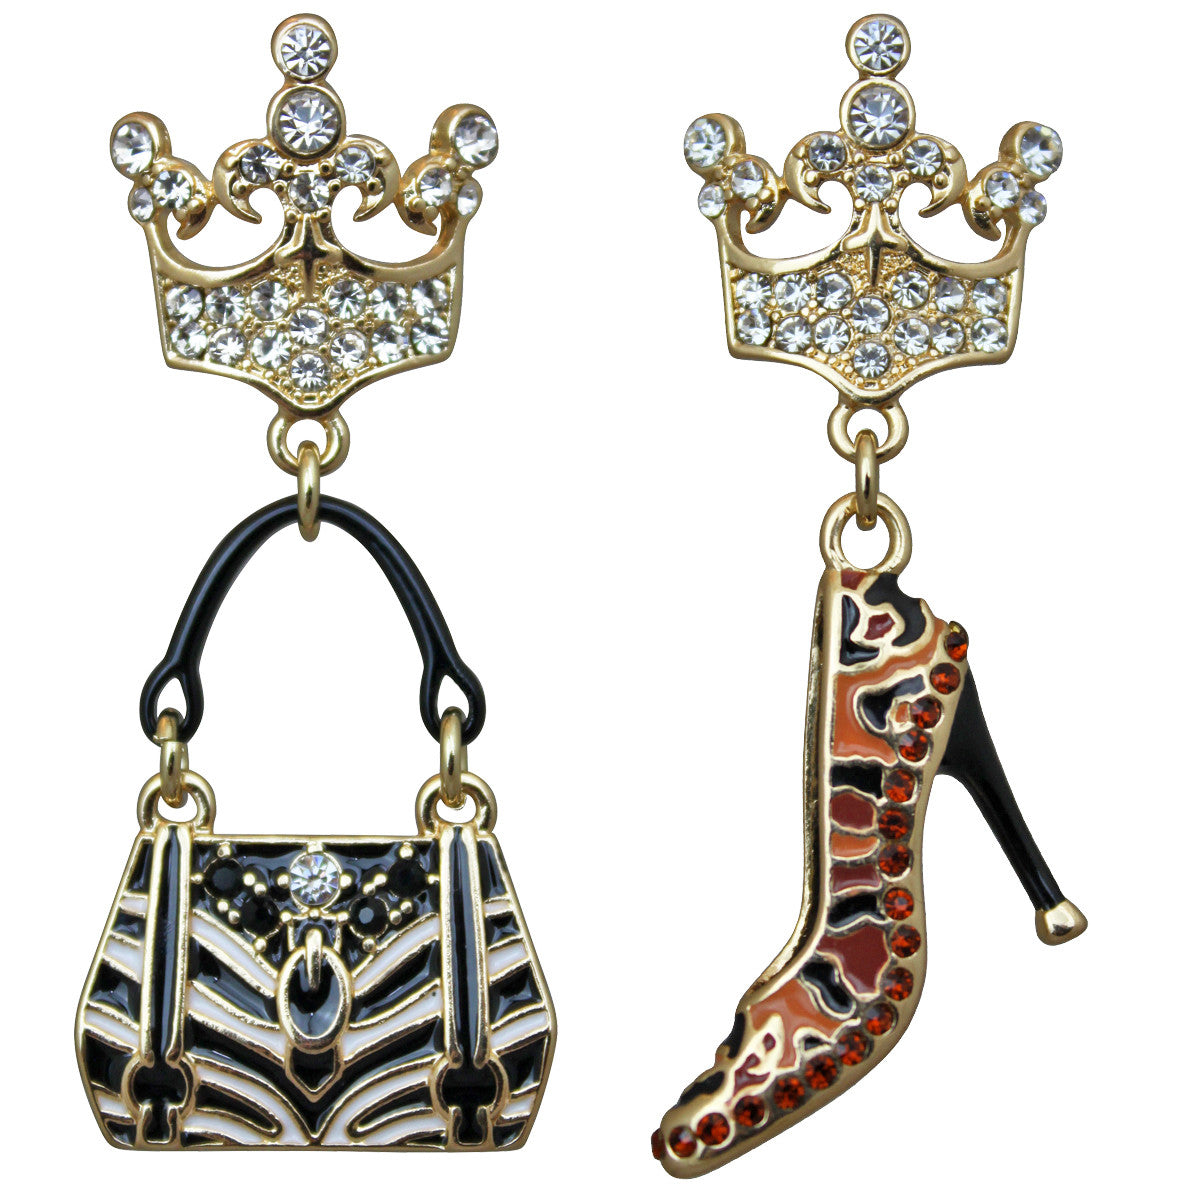 Purse and Shoe Shopping Accessories Jewelry Earrings